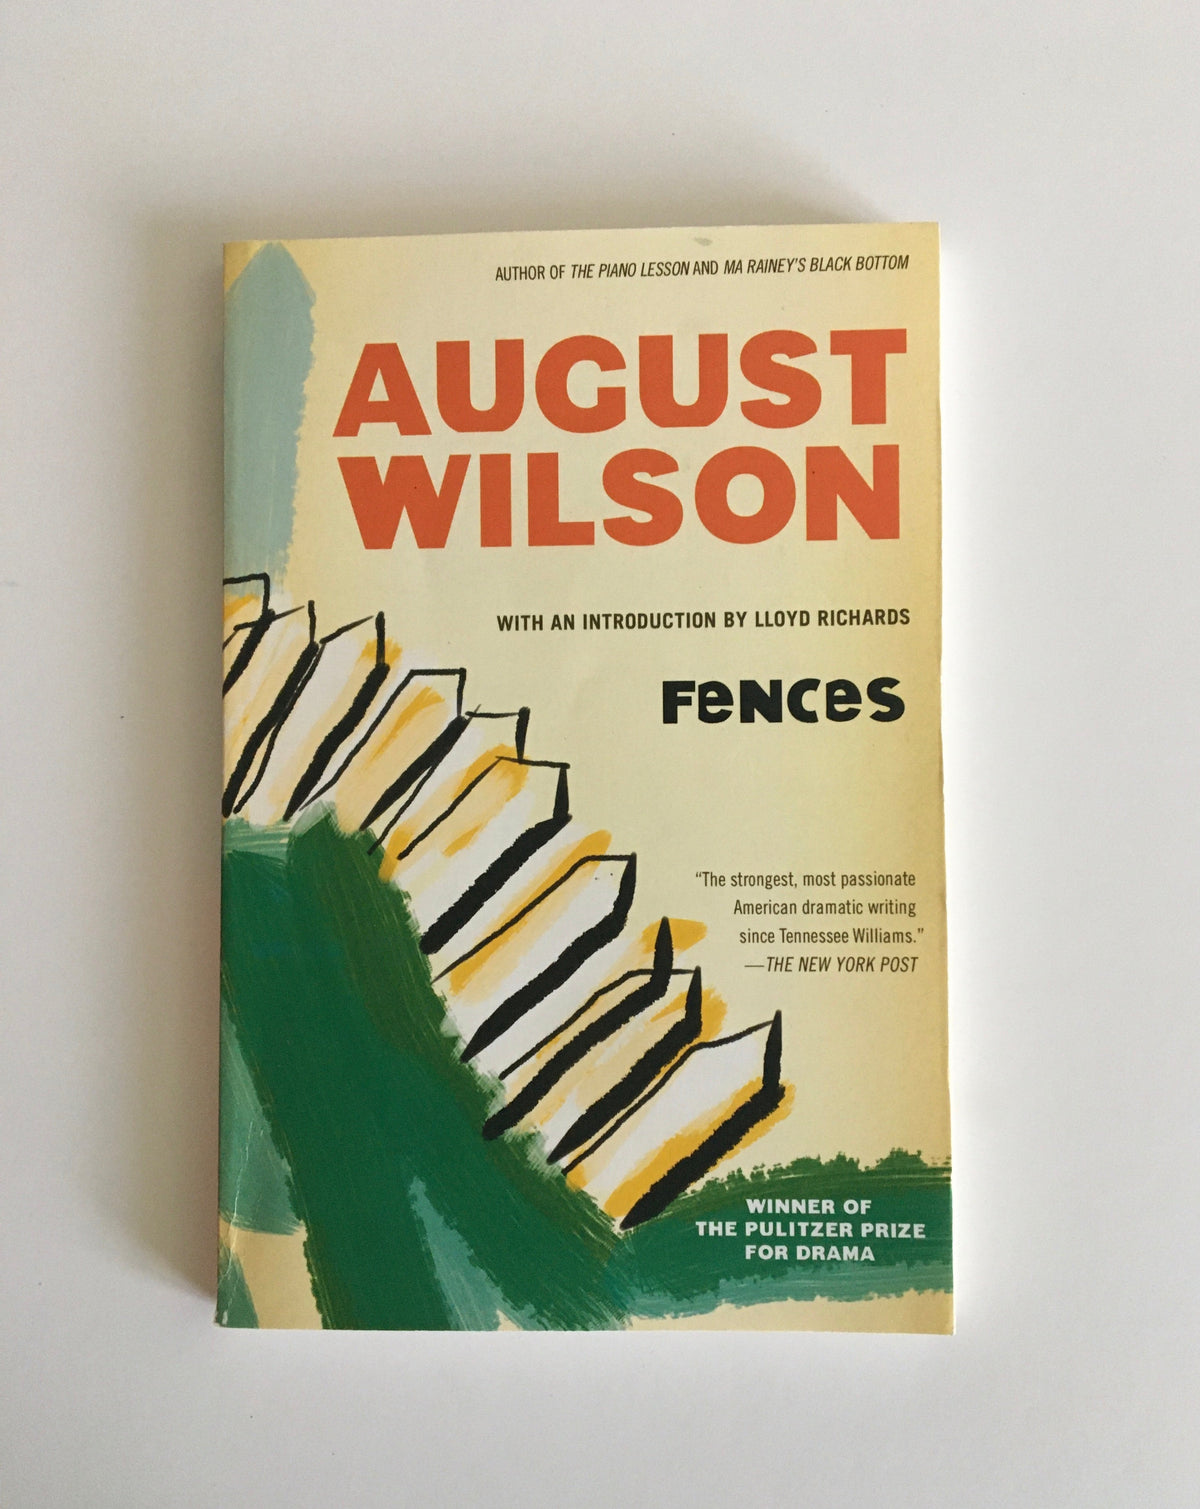 Fences by August Wilson